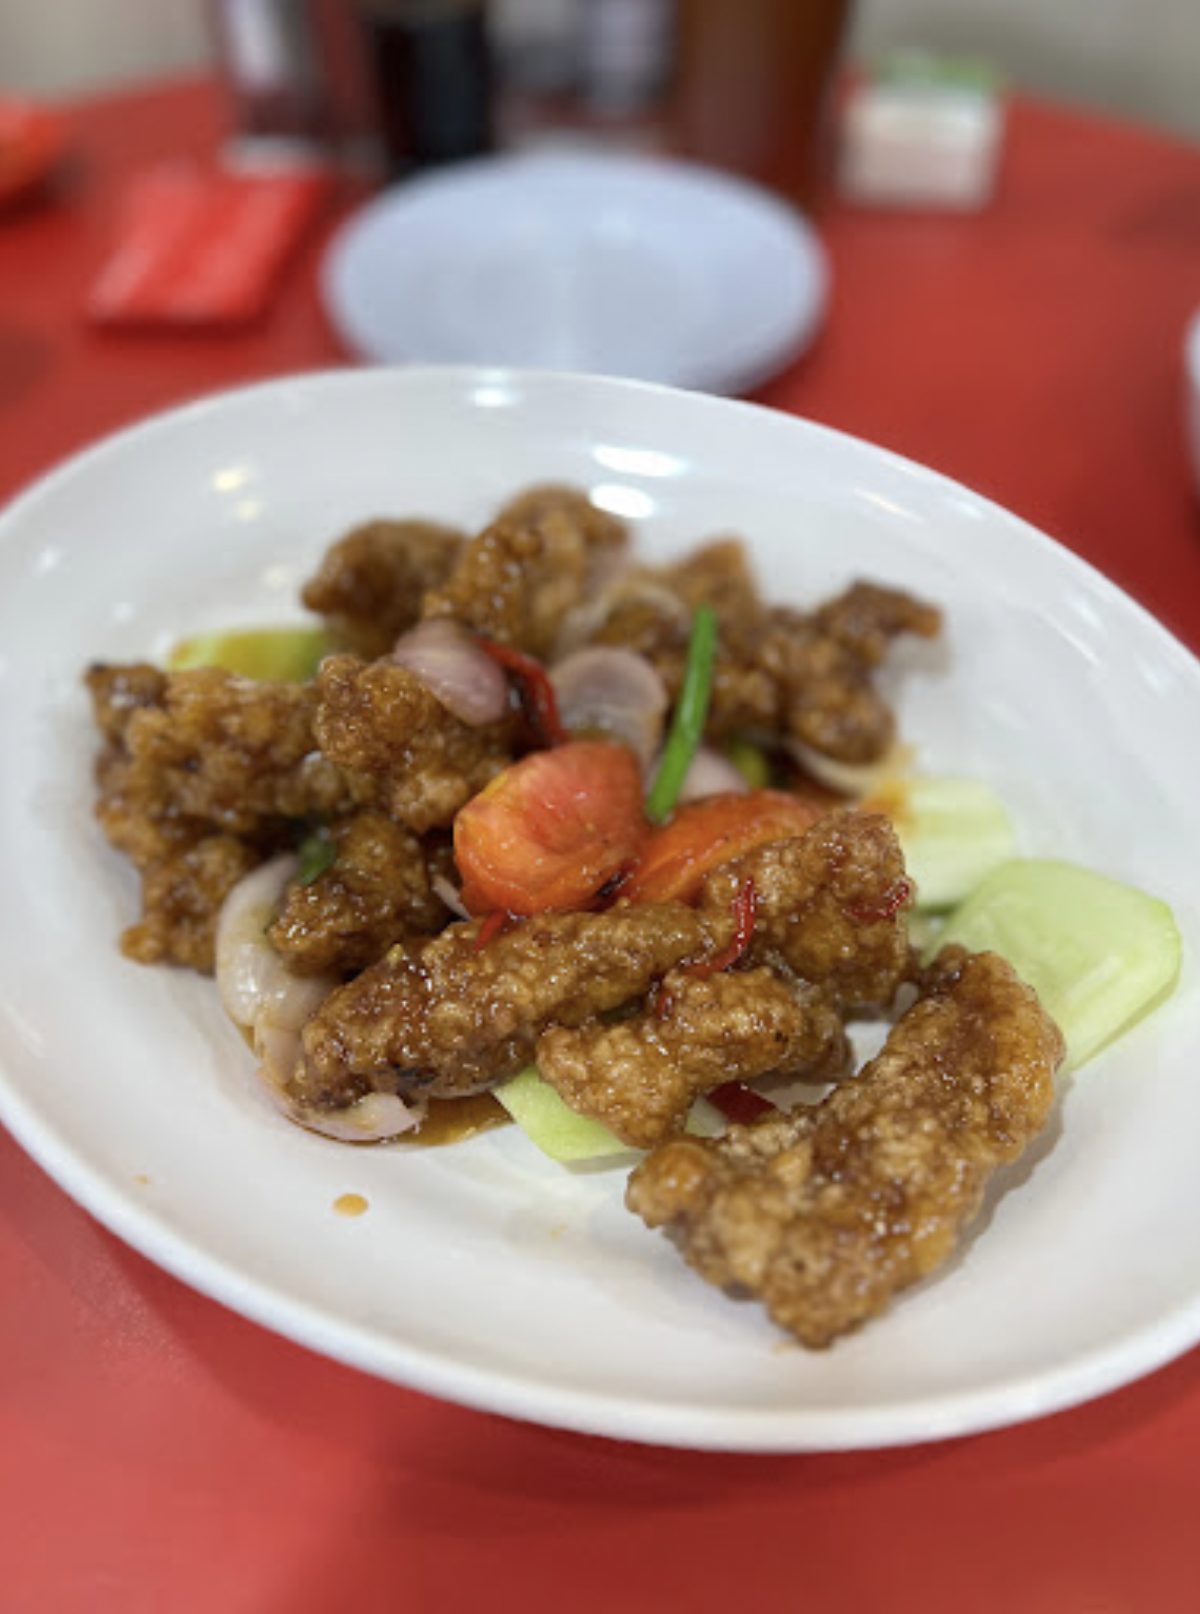 Sweet and sour pork - sik bao sin